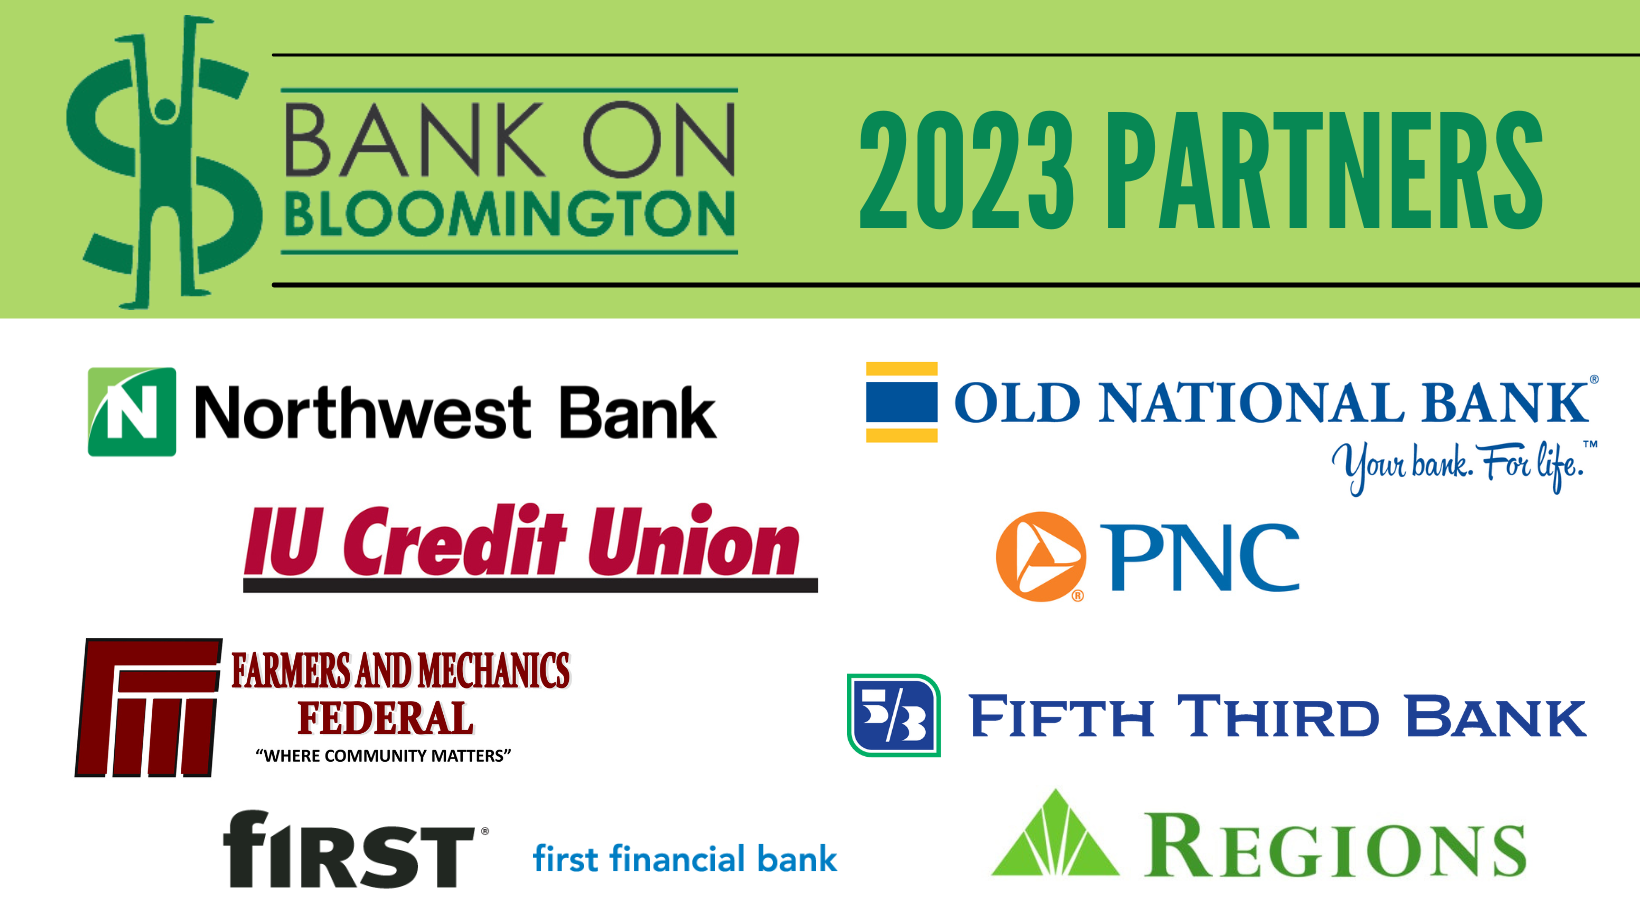 Image with logos of Bank On partners